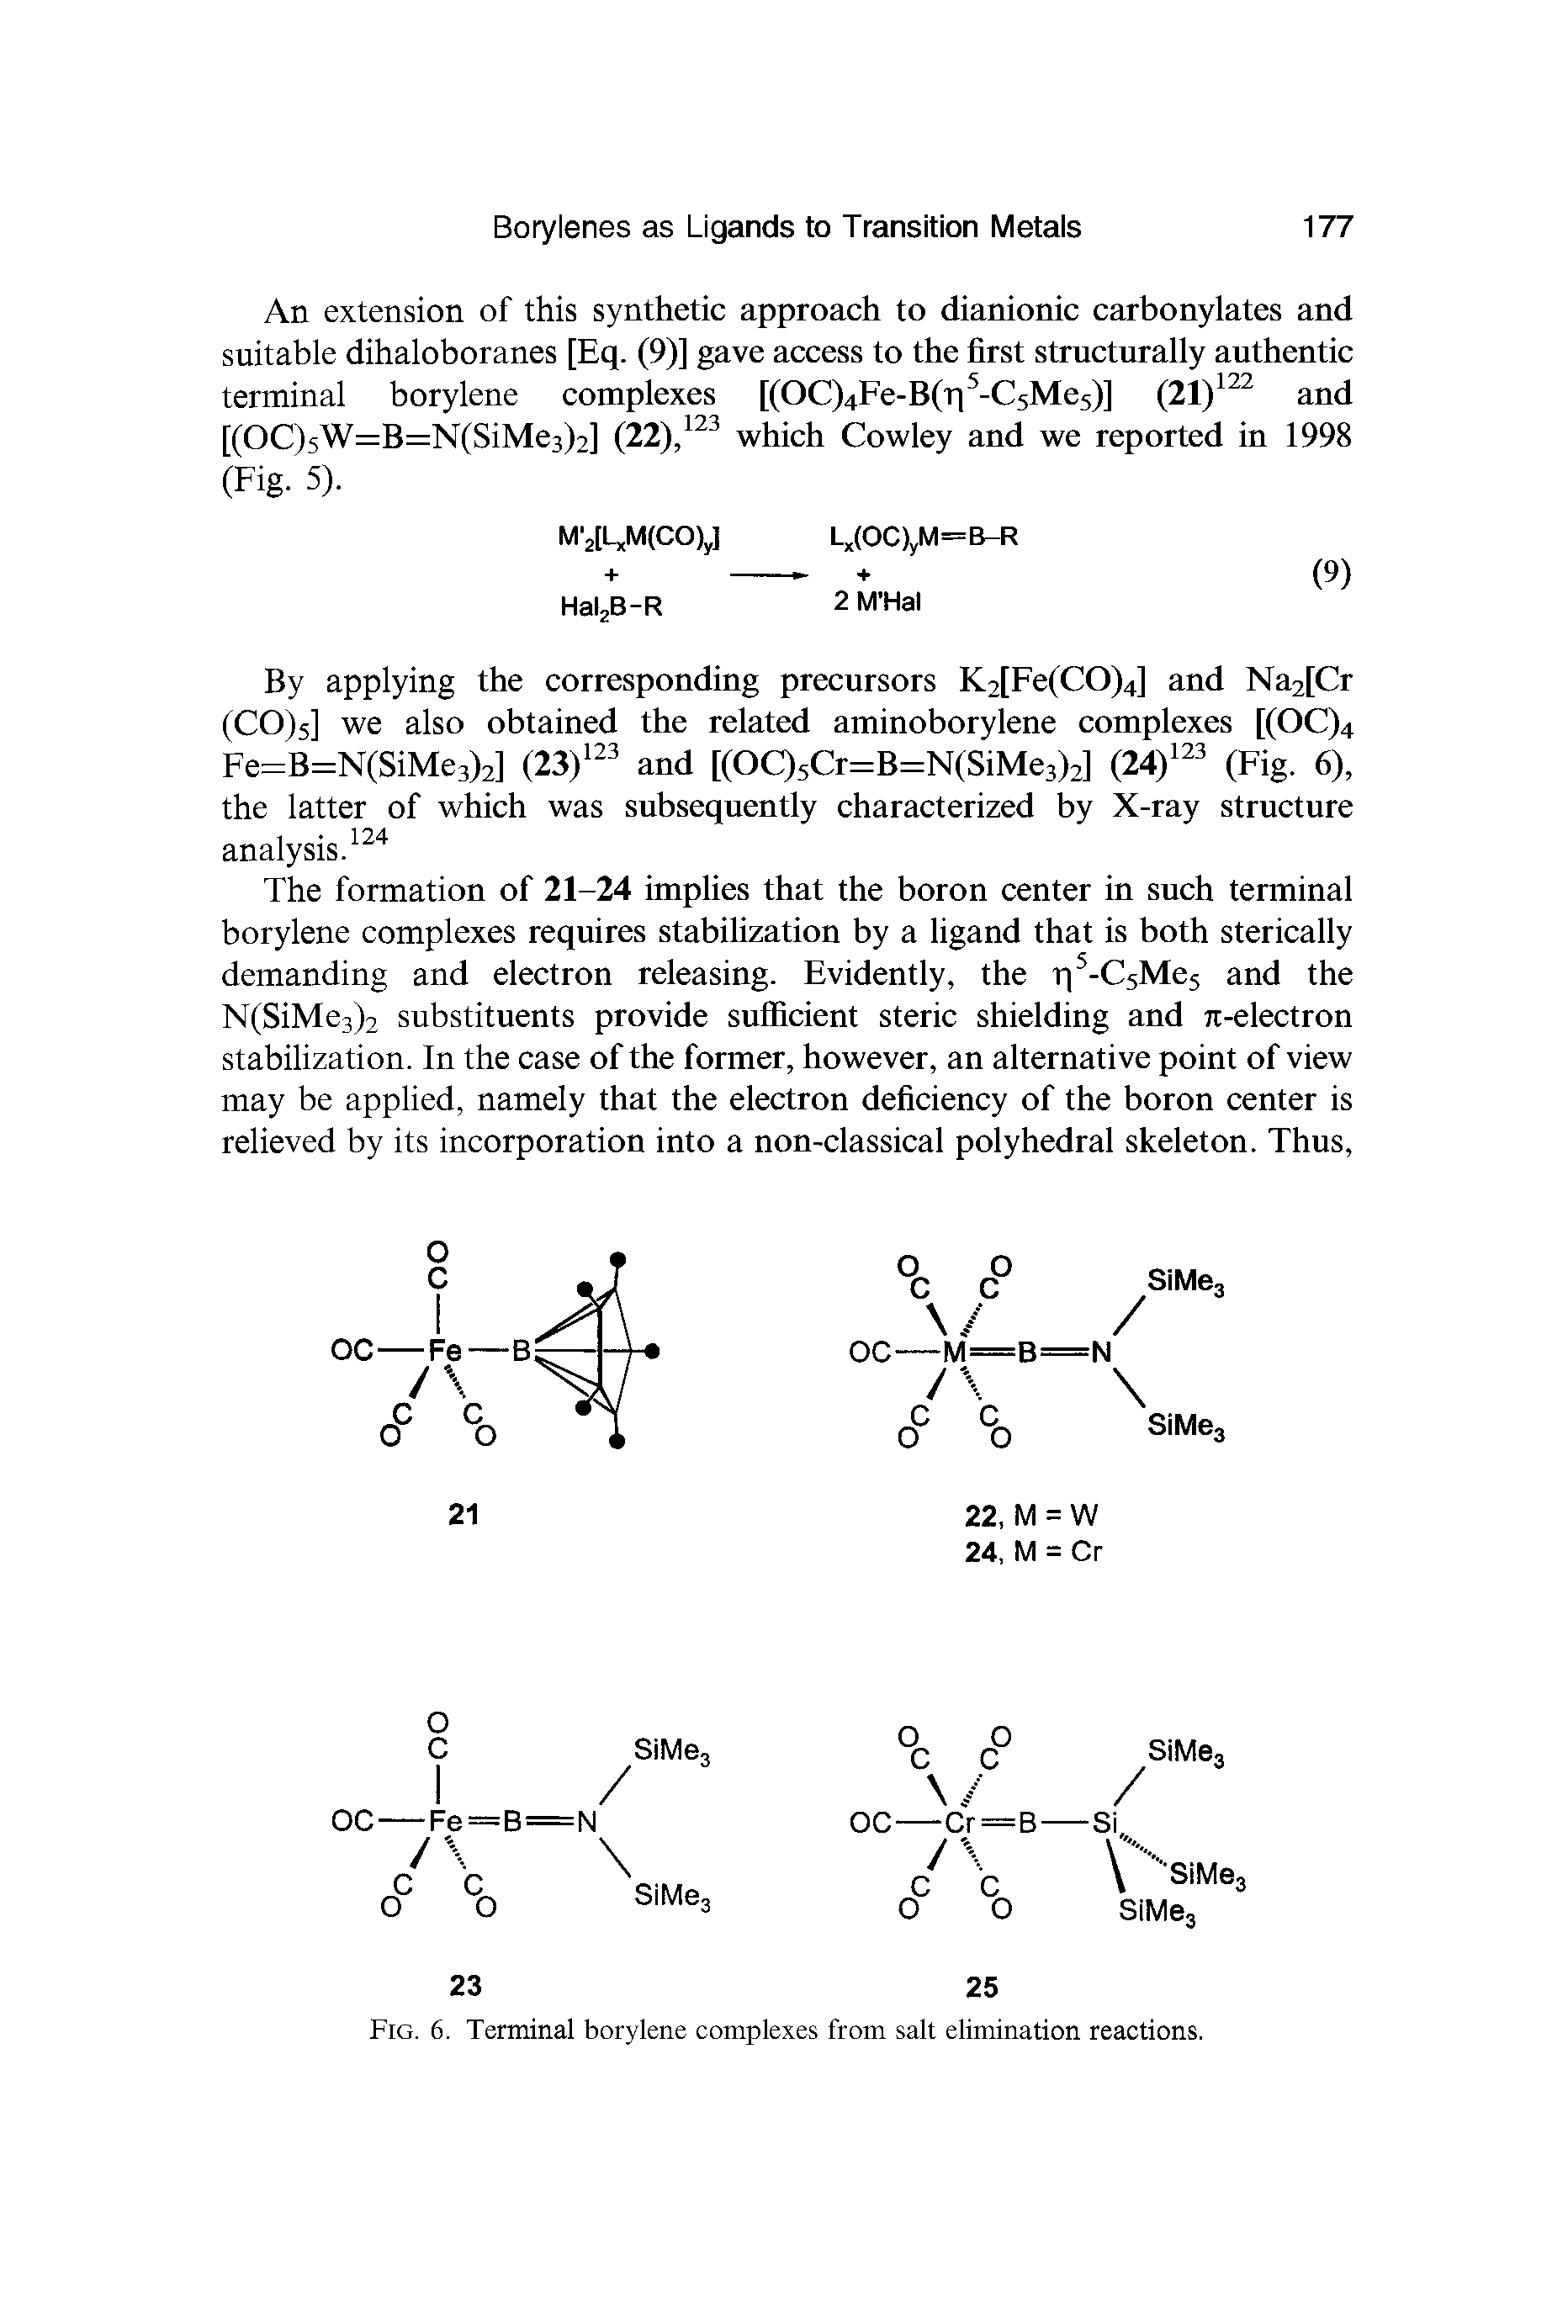 Fig. 6. Terminal borylene complexes from salt elimination reactions.